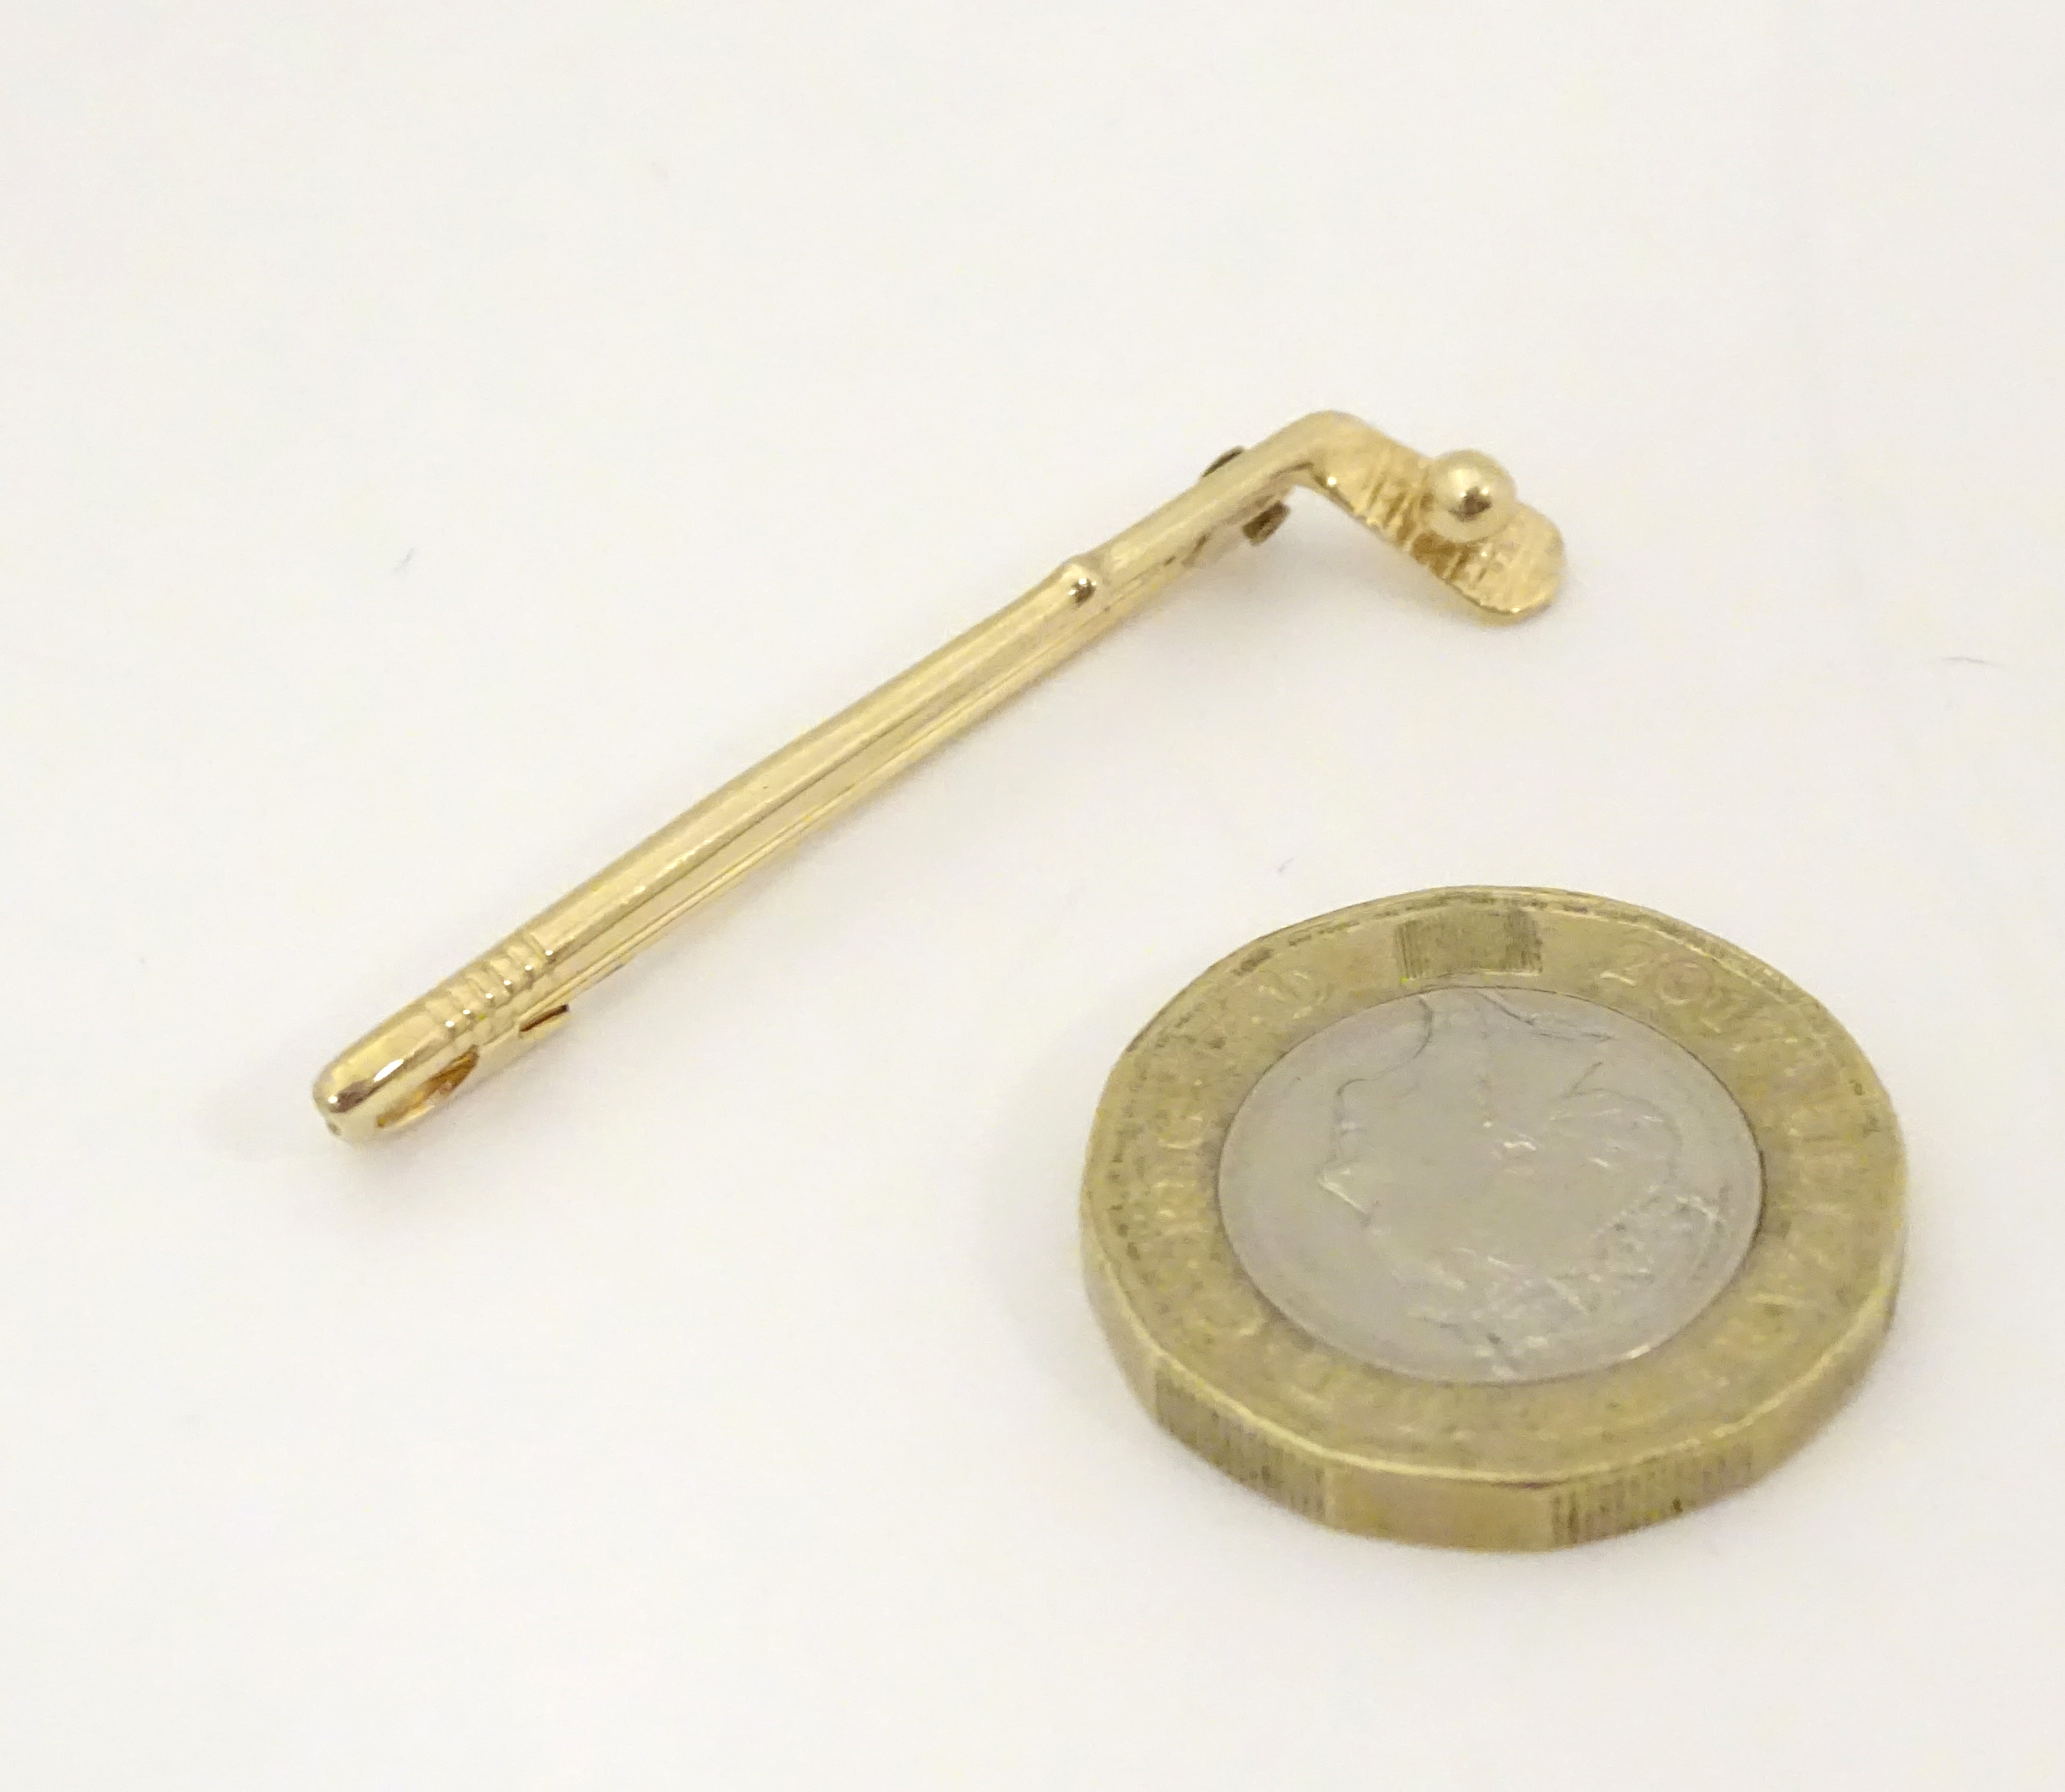 A 9ct gold brooch / pin formed as a golf club and ball. - Image 7 of 7